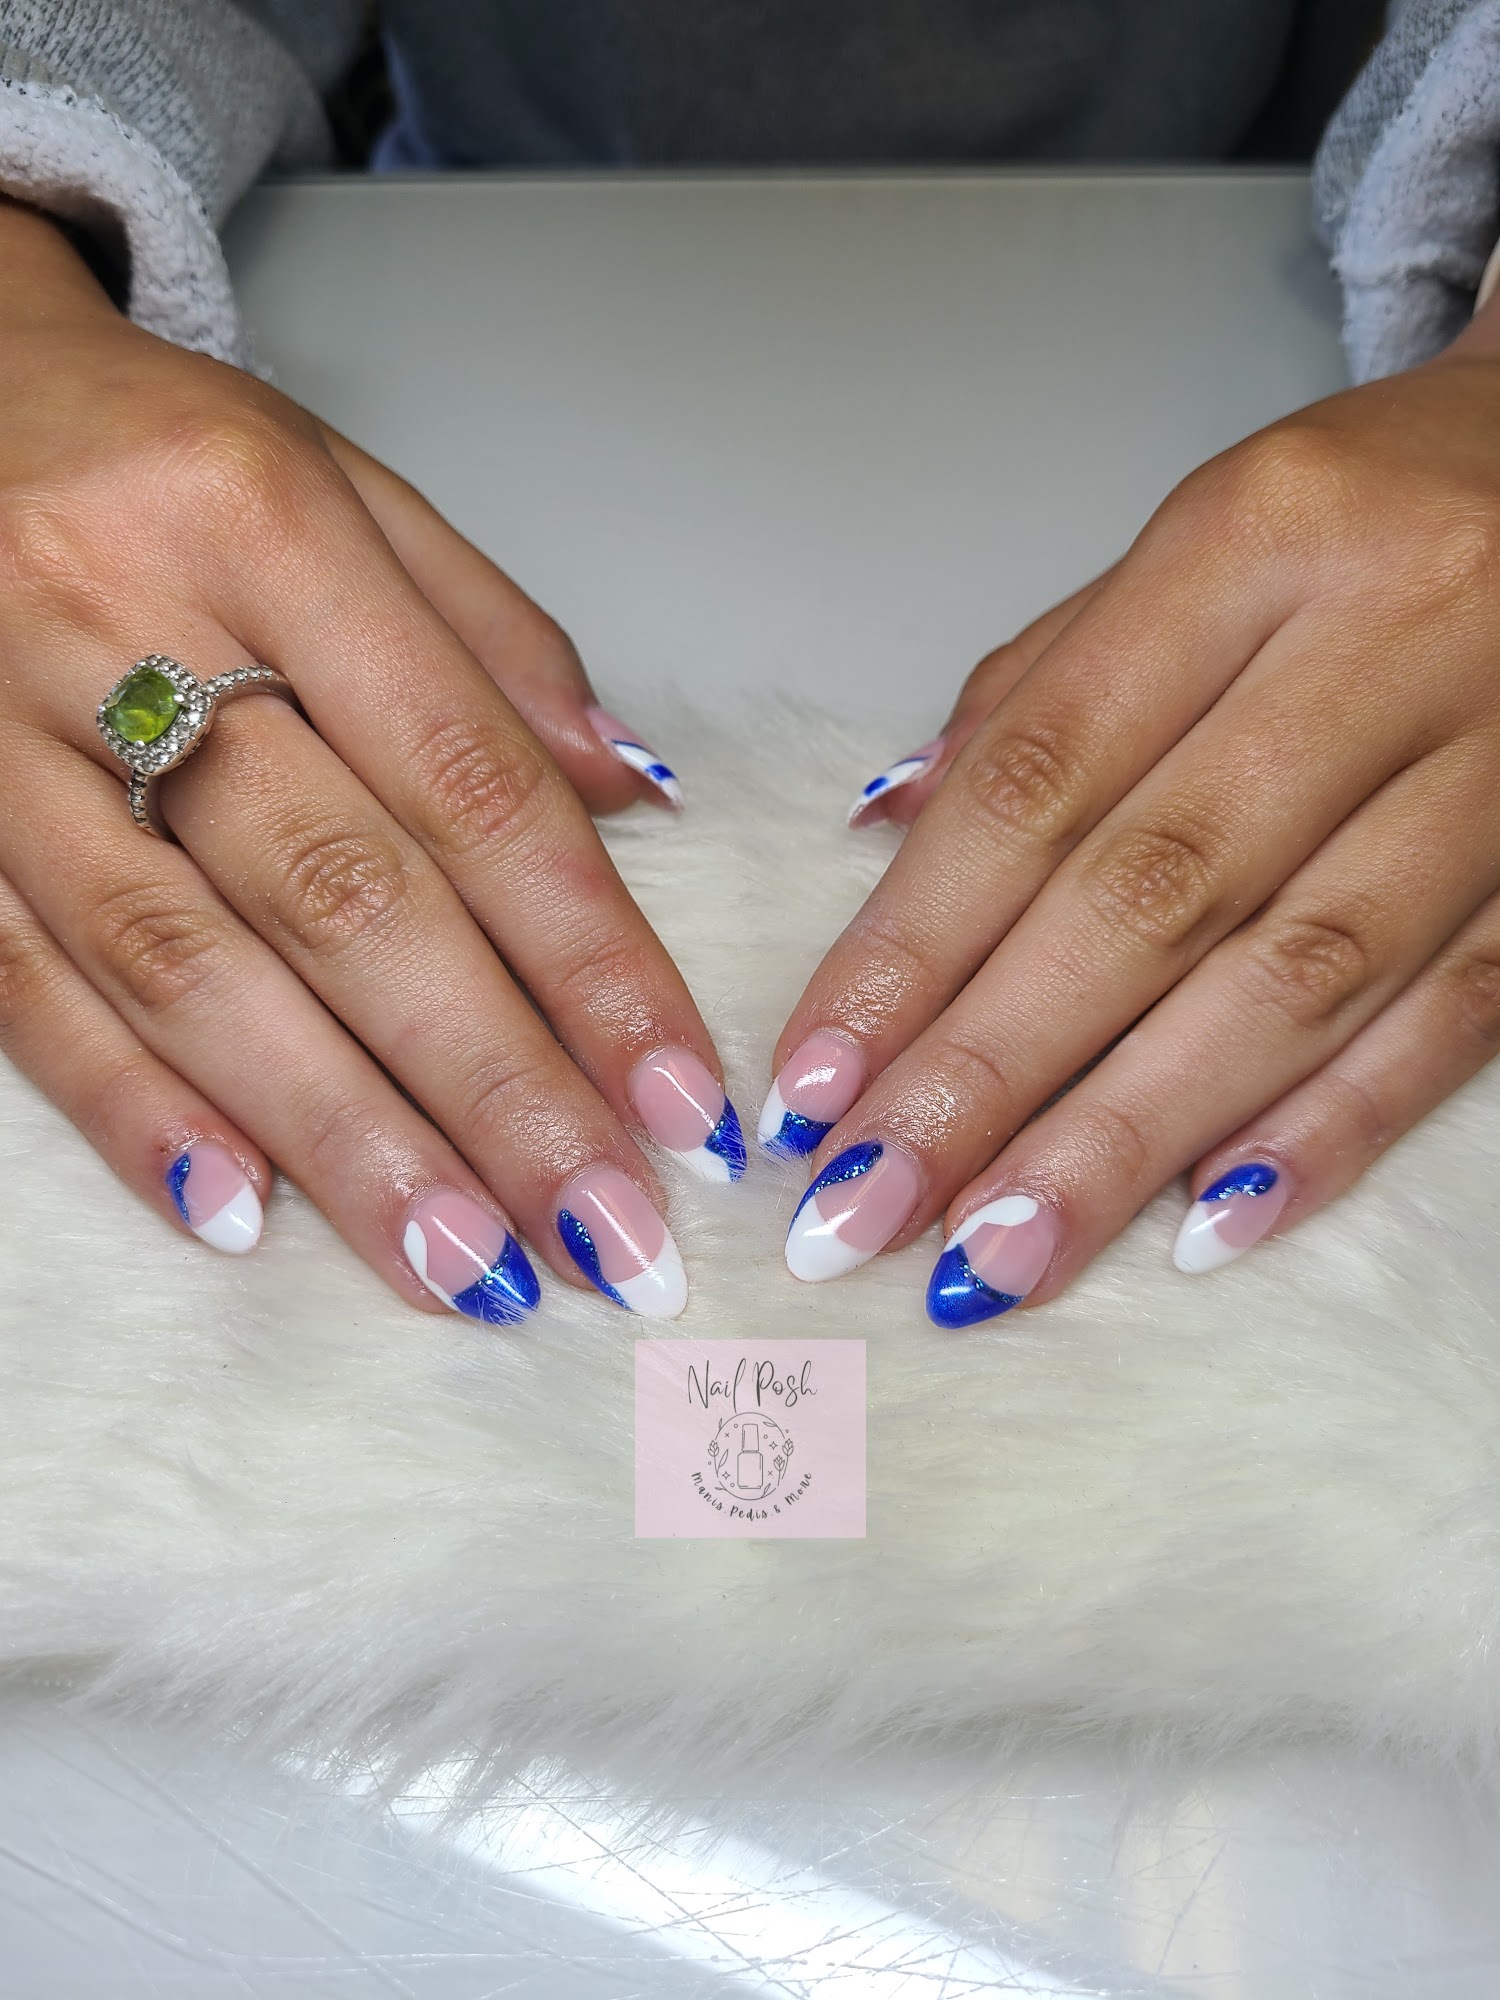 Nail Posh 2759 US-31W Suite 2C, White House Tennessee 37188